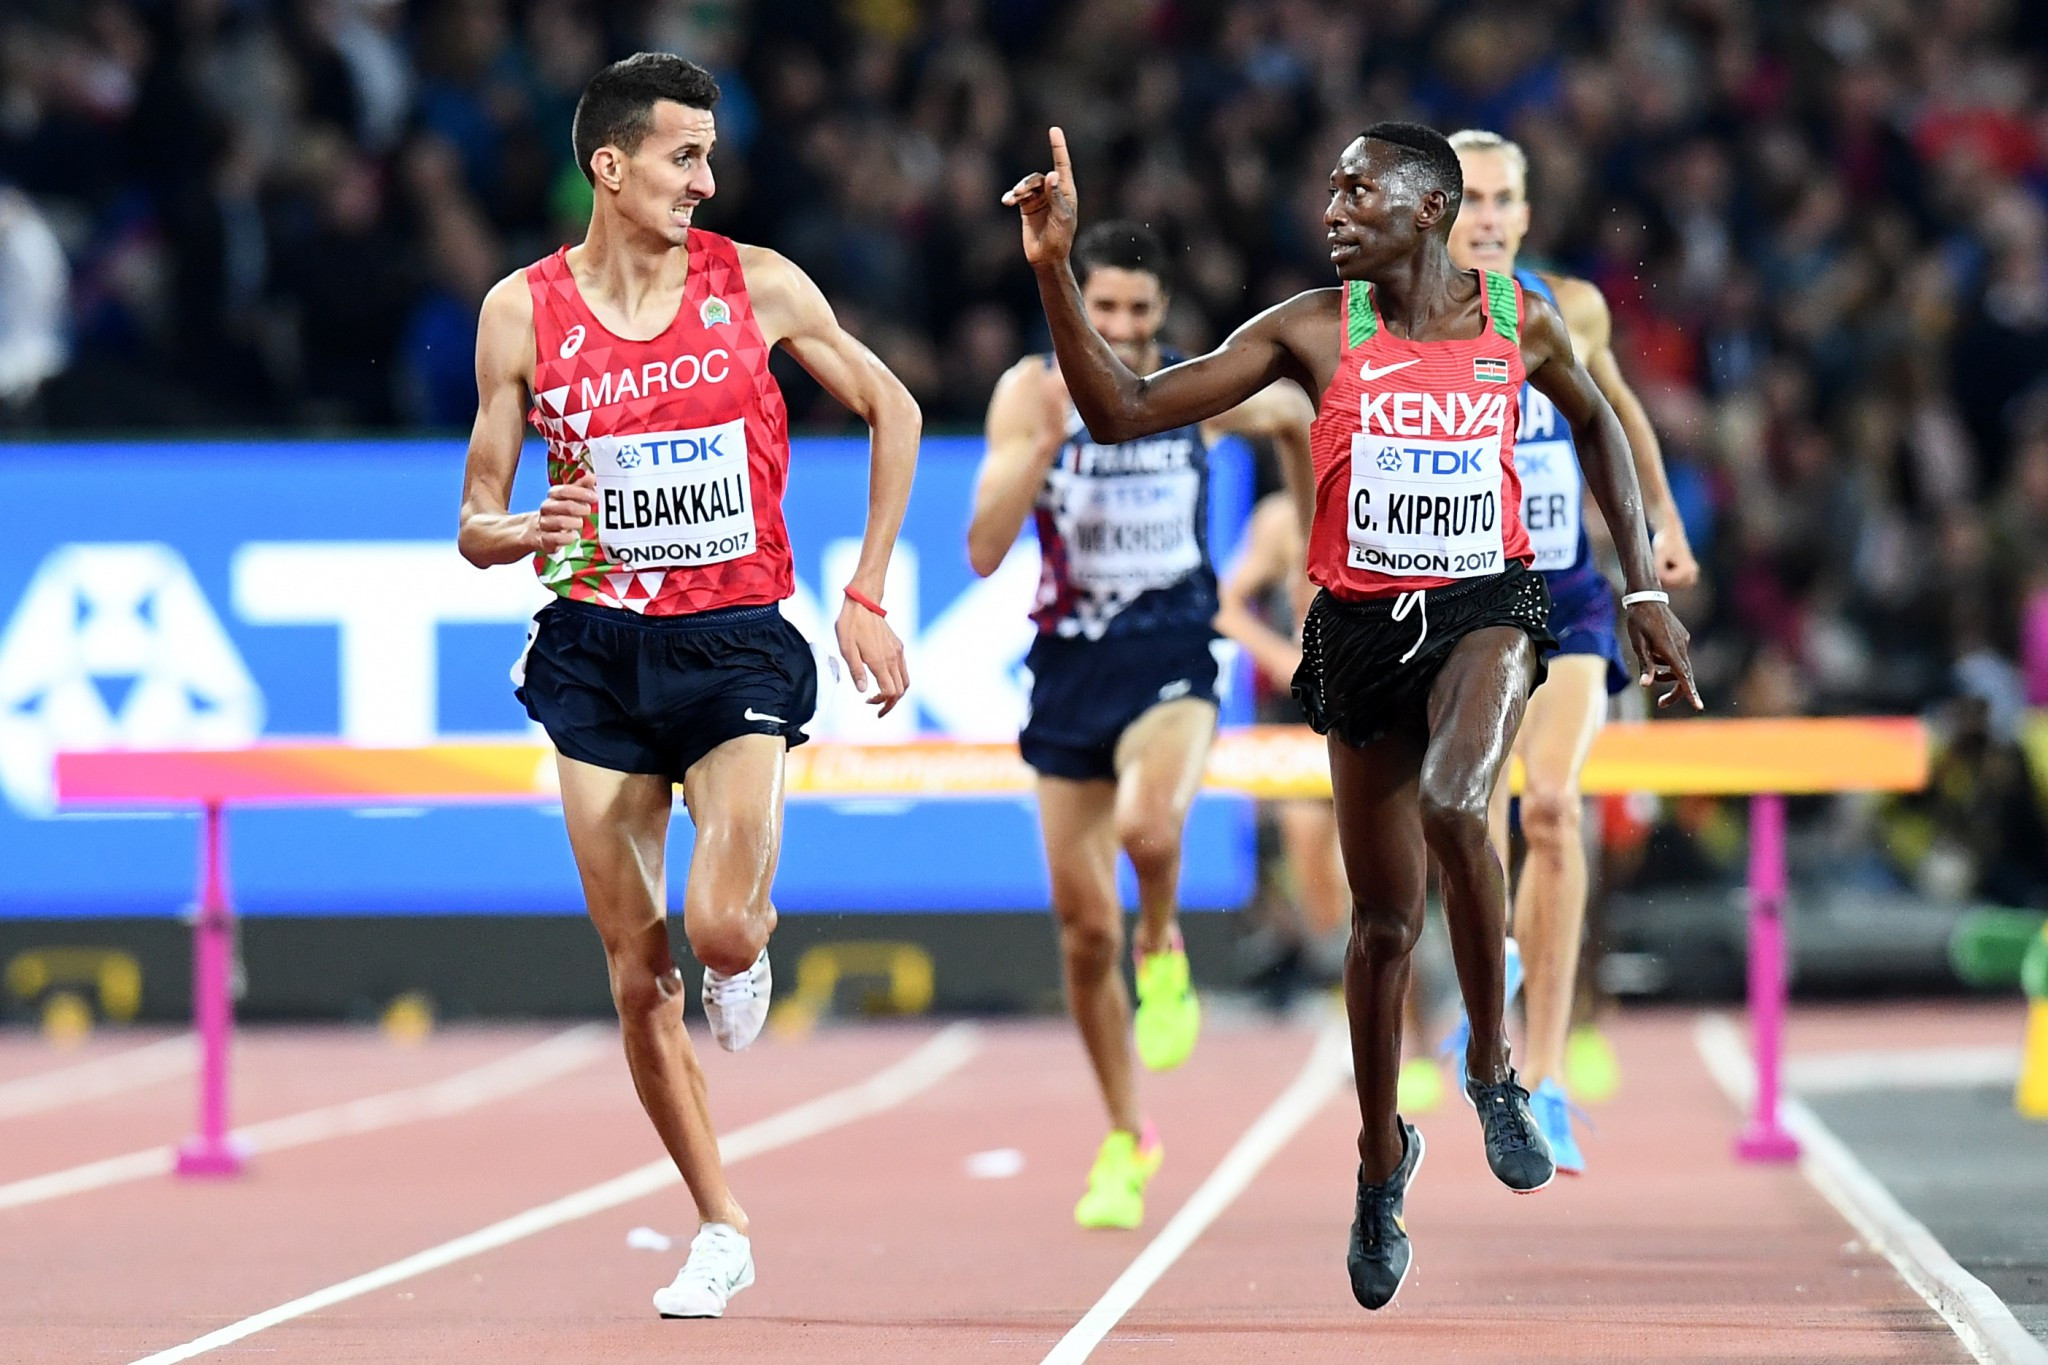 Steeplechase gold medallist Conseslus Kipruto had time to showboat before crossing the line to secure gold ©Getty Images